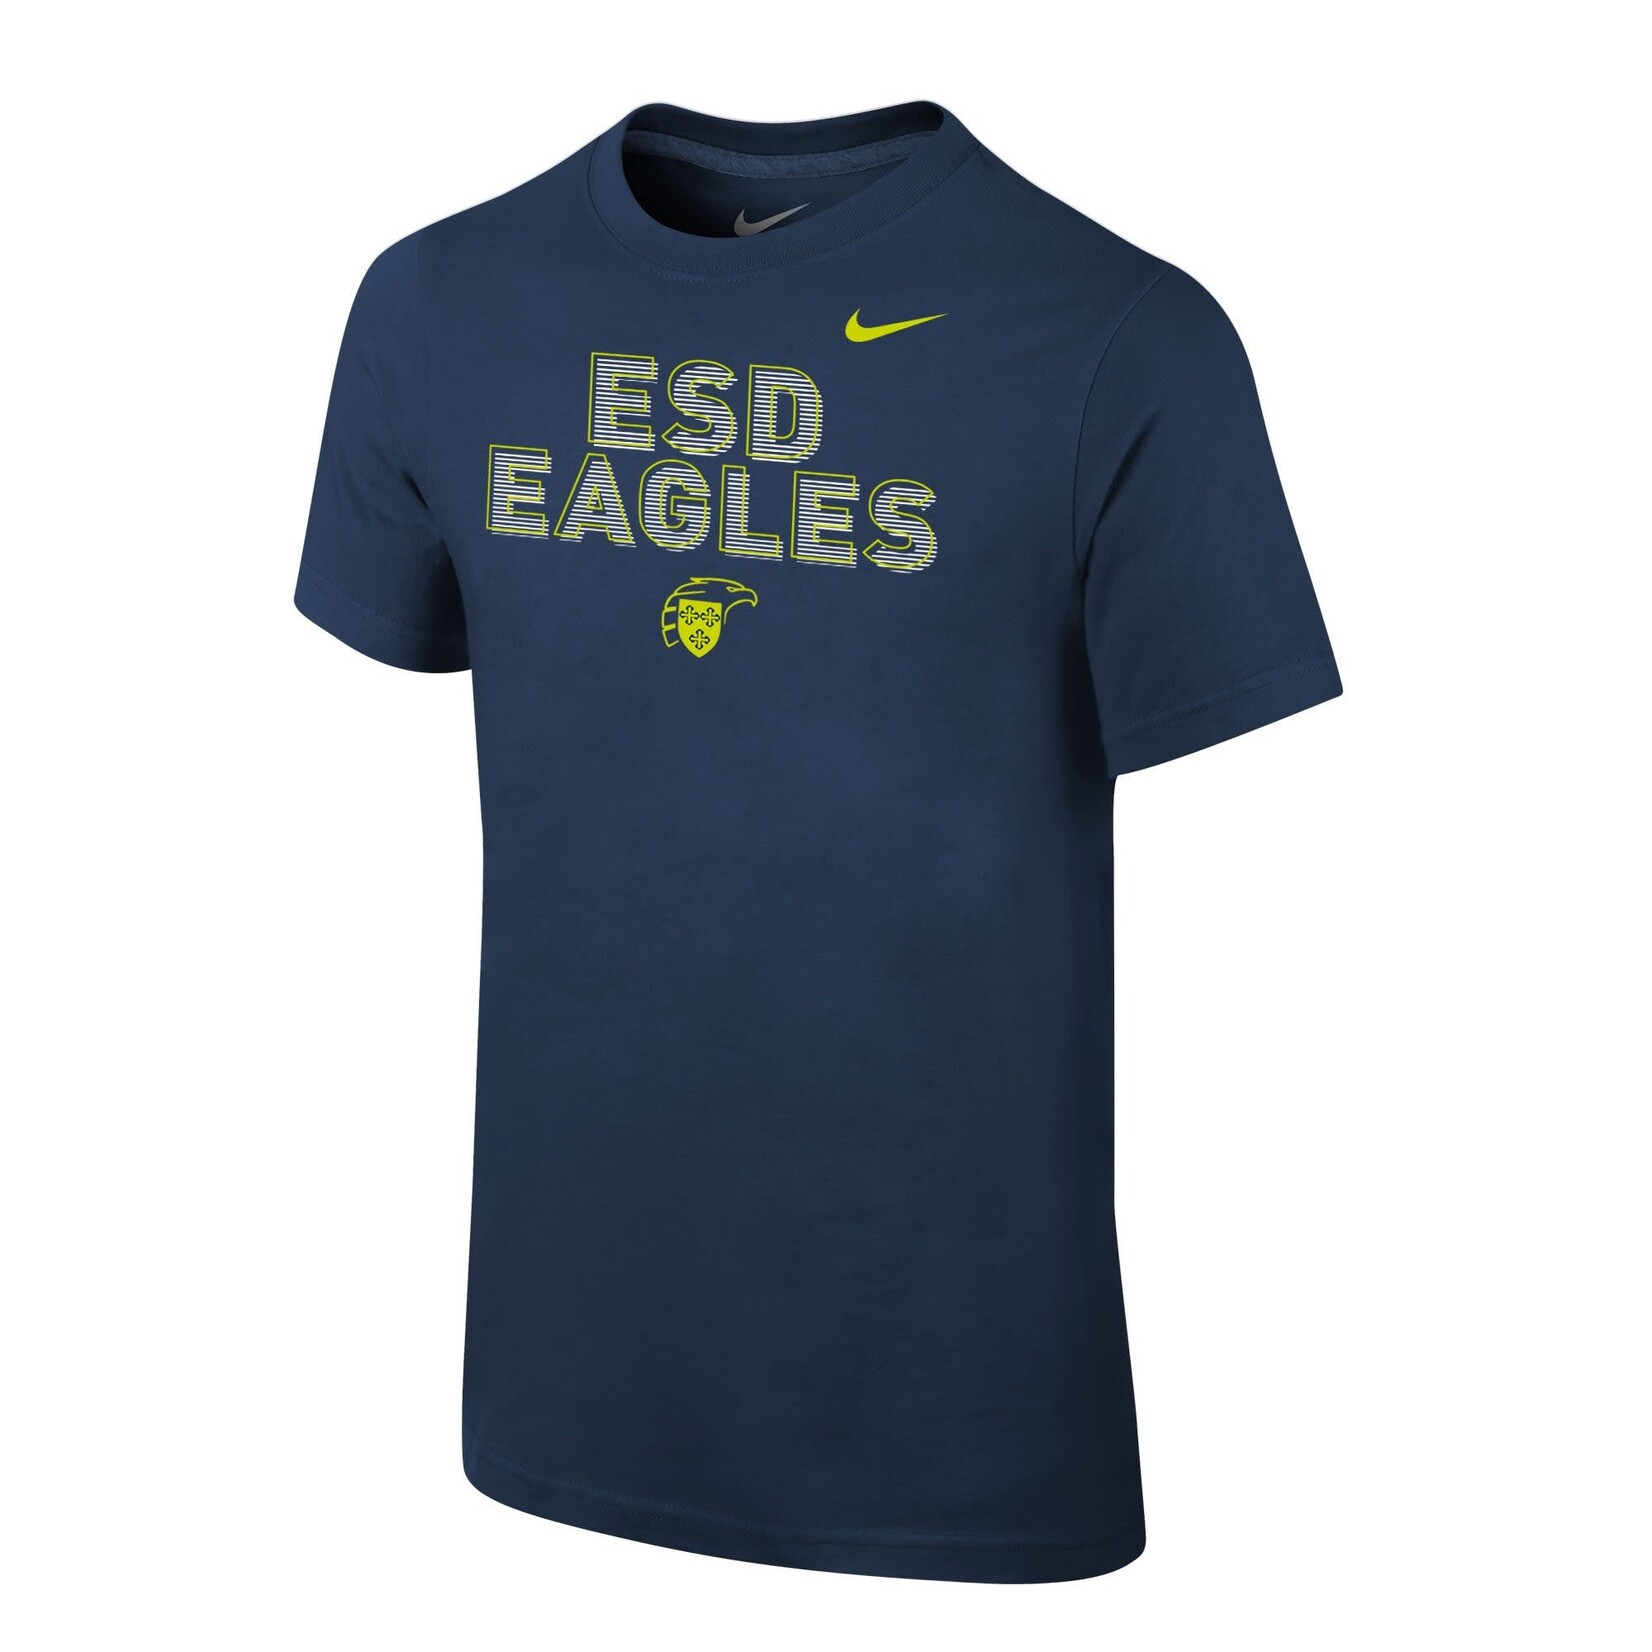 Nike Youth Tee ESD EAGLES with Neon Green